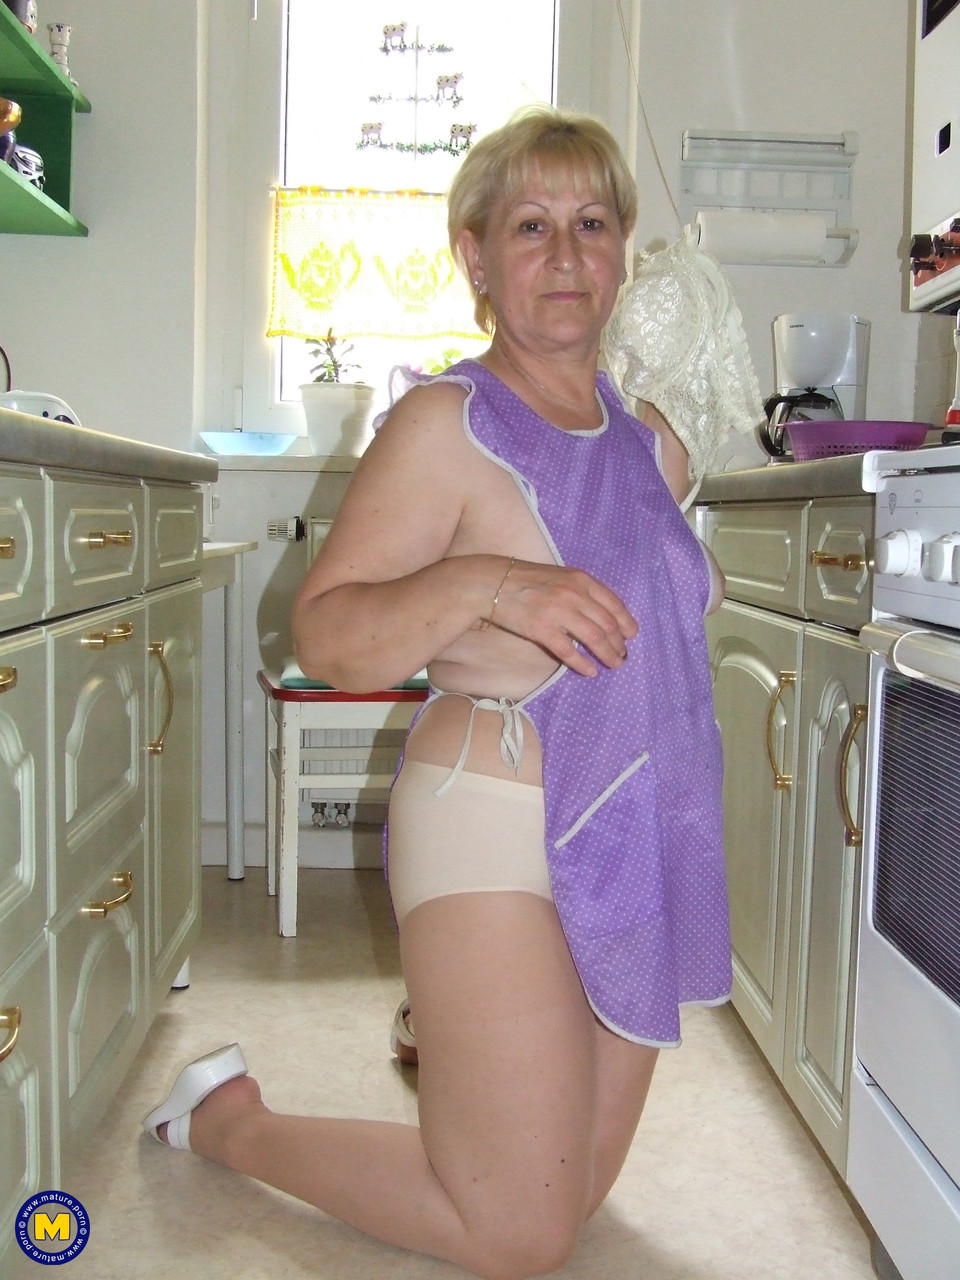 Short haired German cleaning lady Dagmar shows her mature cunt in the kitchen photo porno #425226963 | Mature NL Pics, Dagmar, German, porno mobile